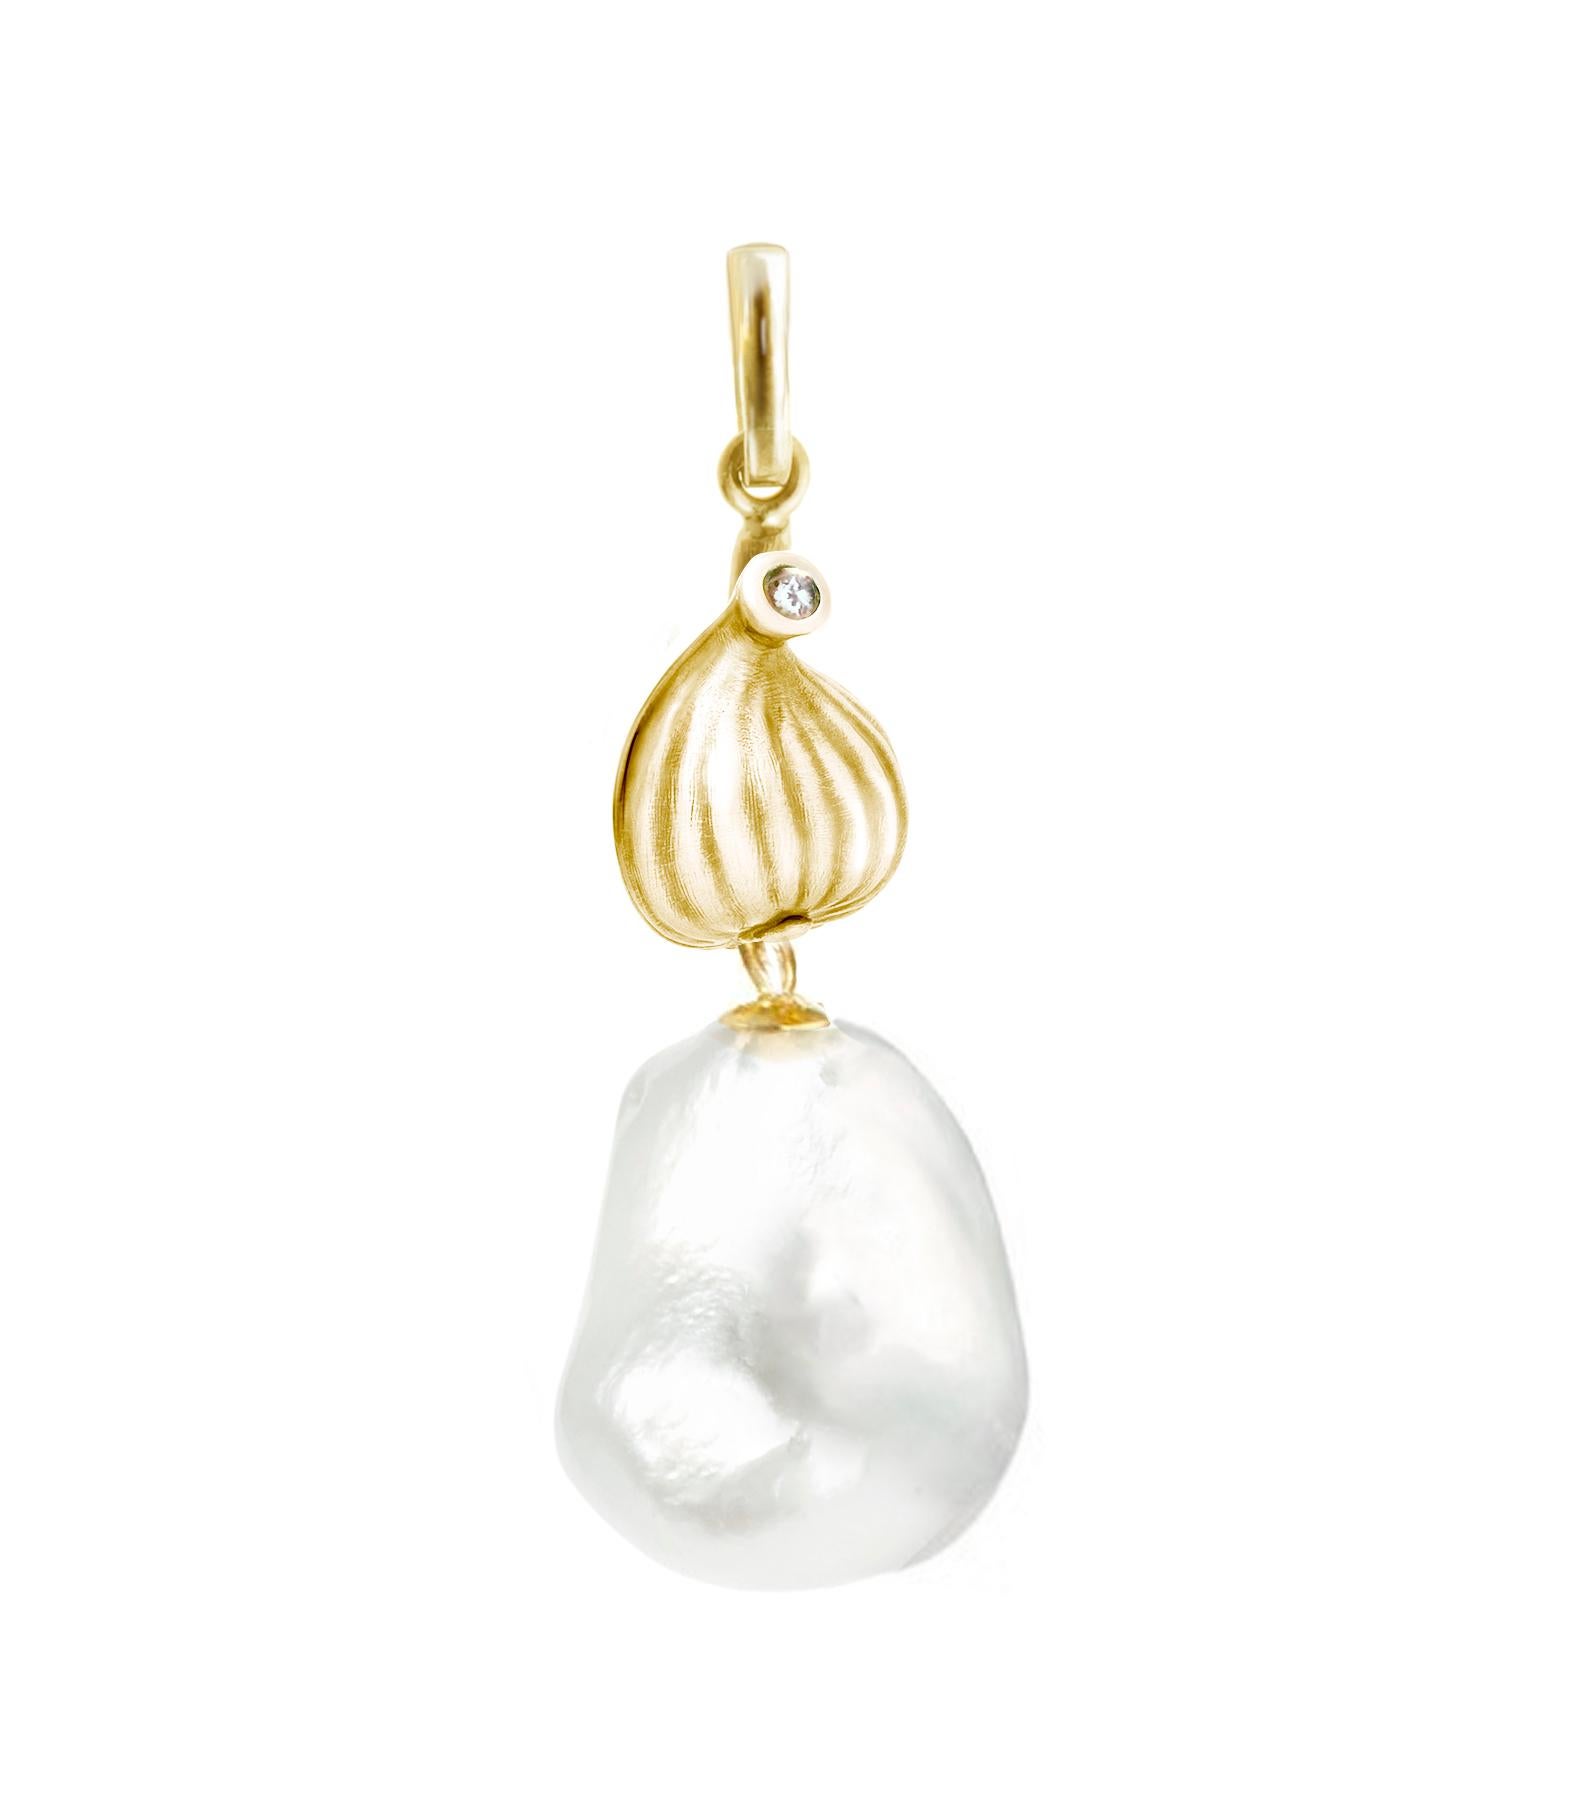 This 14 karat yellow gold pendant belongs to the Fig collection, which was showcased in Vogue UA review. It features a Tahitian baroque pearl and a round diamond, and has a contemporary designer style. We only use top-quality, natural diamonds that